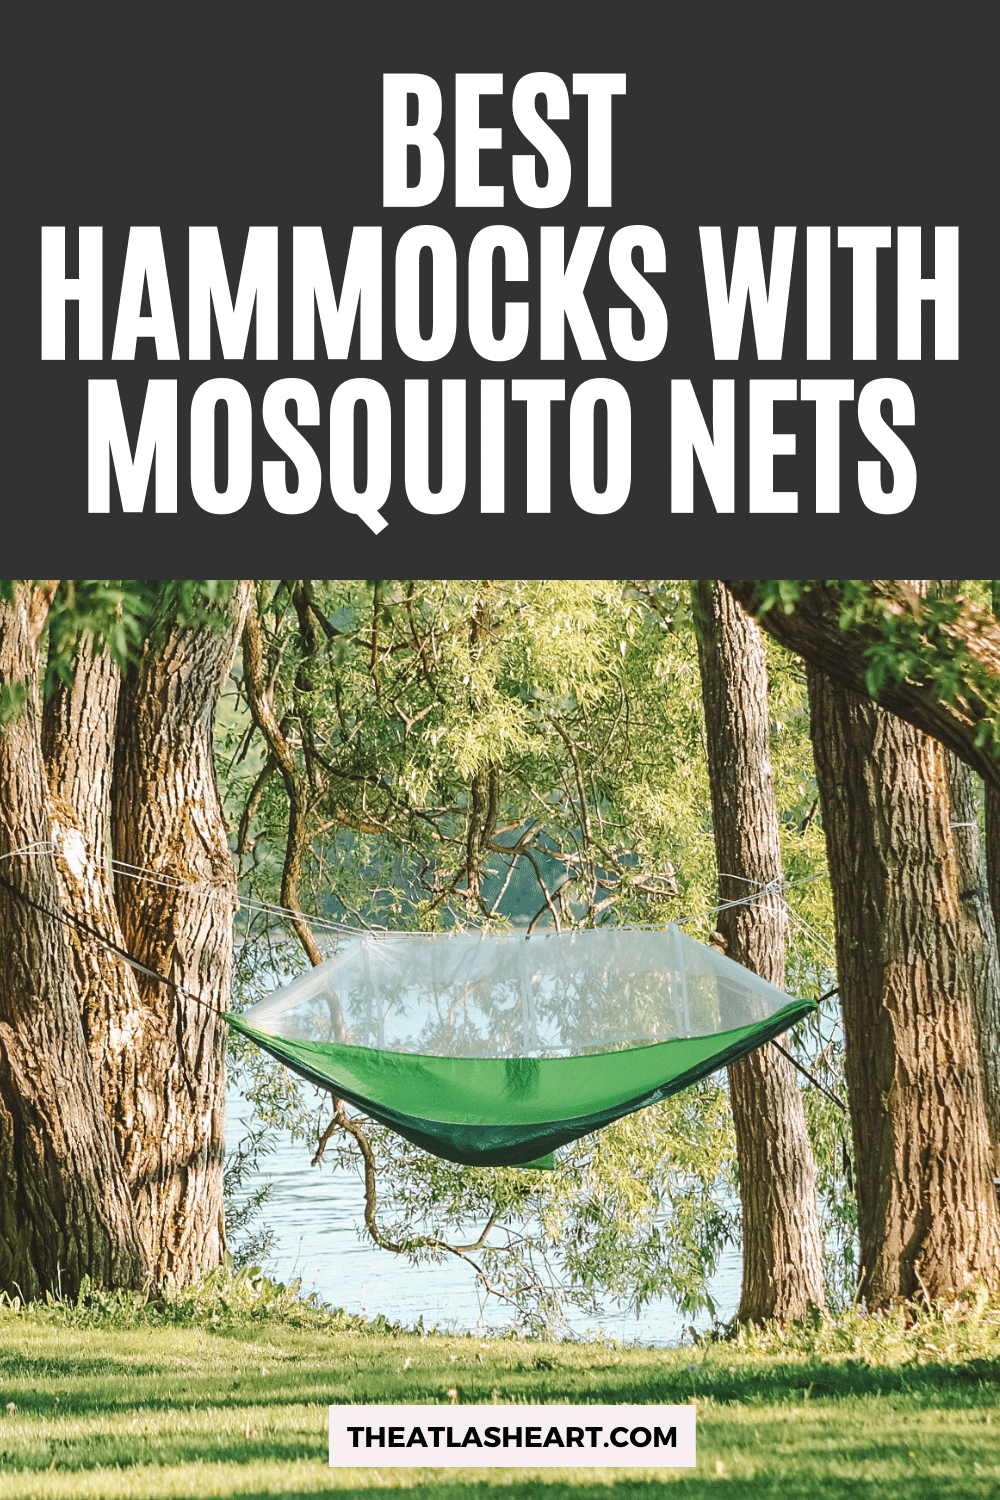 12 Best Hammocks with a Mosquito Net to Keep the Bugs at Bay in 2022 